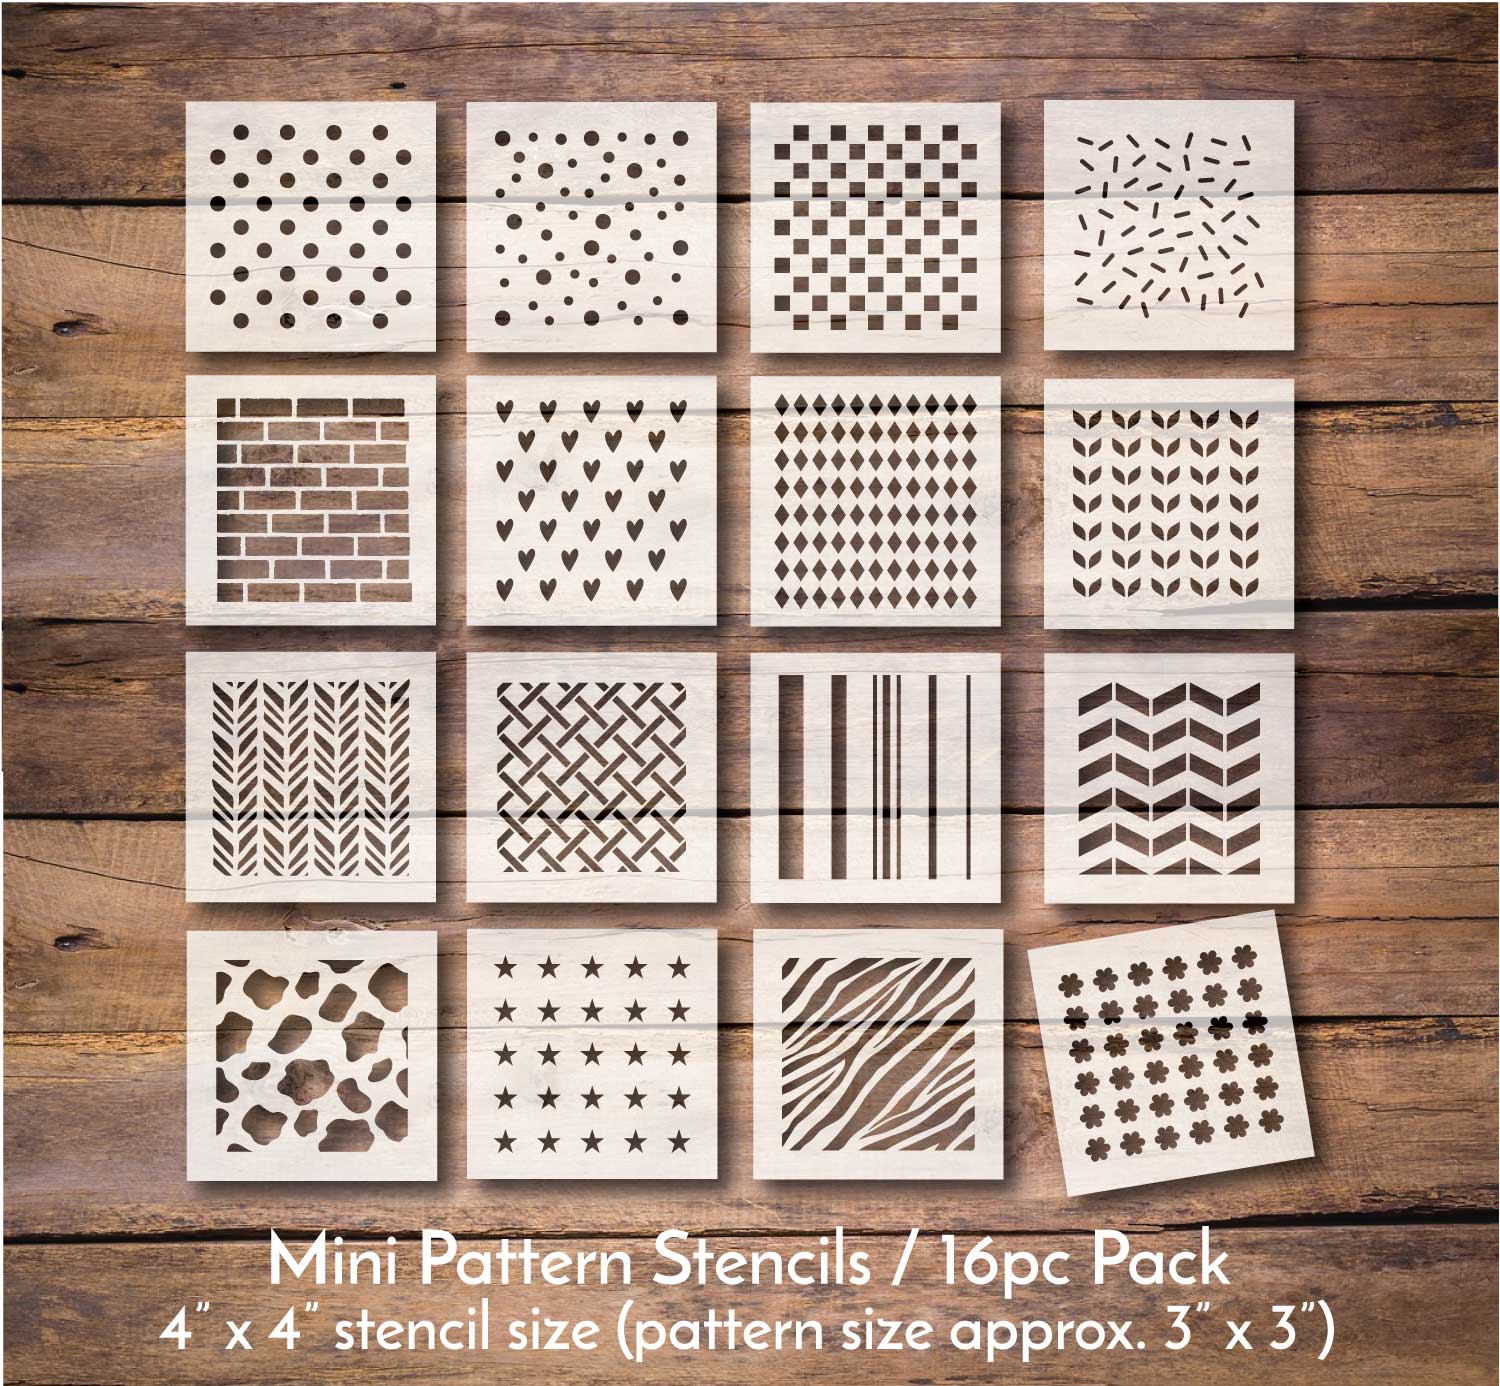  Complete Stencil and Paper Cutting Kit - Value Pack